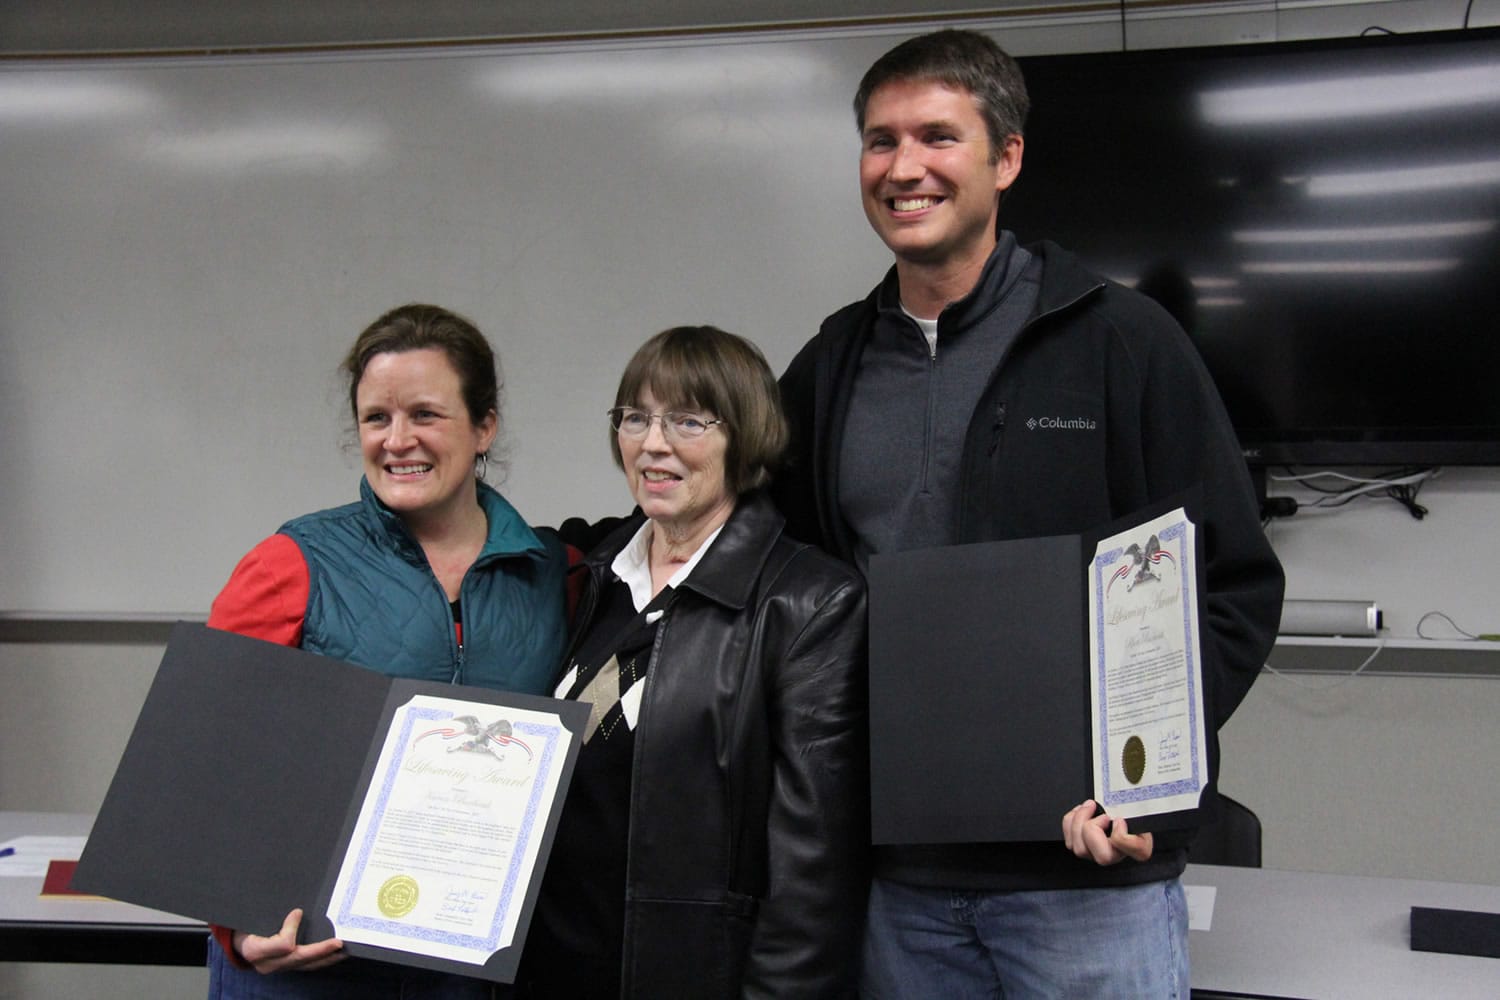 Karen Burbank, 39, left, and husband Rhett, 40, hold the lifesaving awards they were presented Tuesday for coming to the aid of their neighbor Sharon Miller, 65, center.